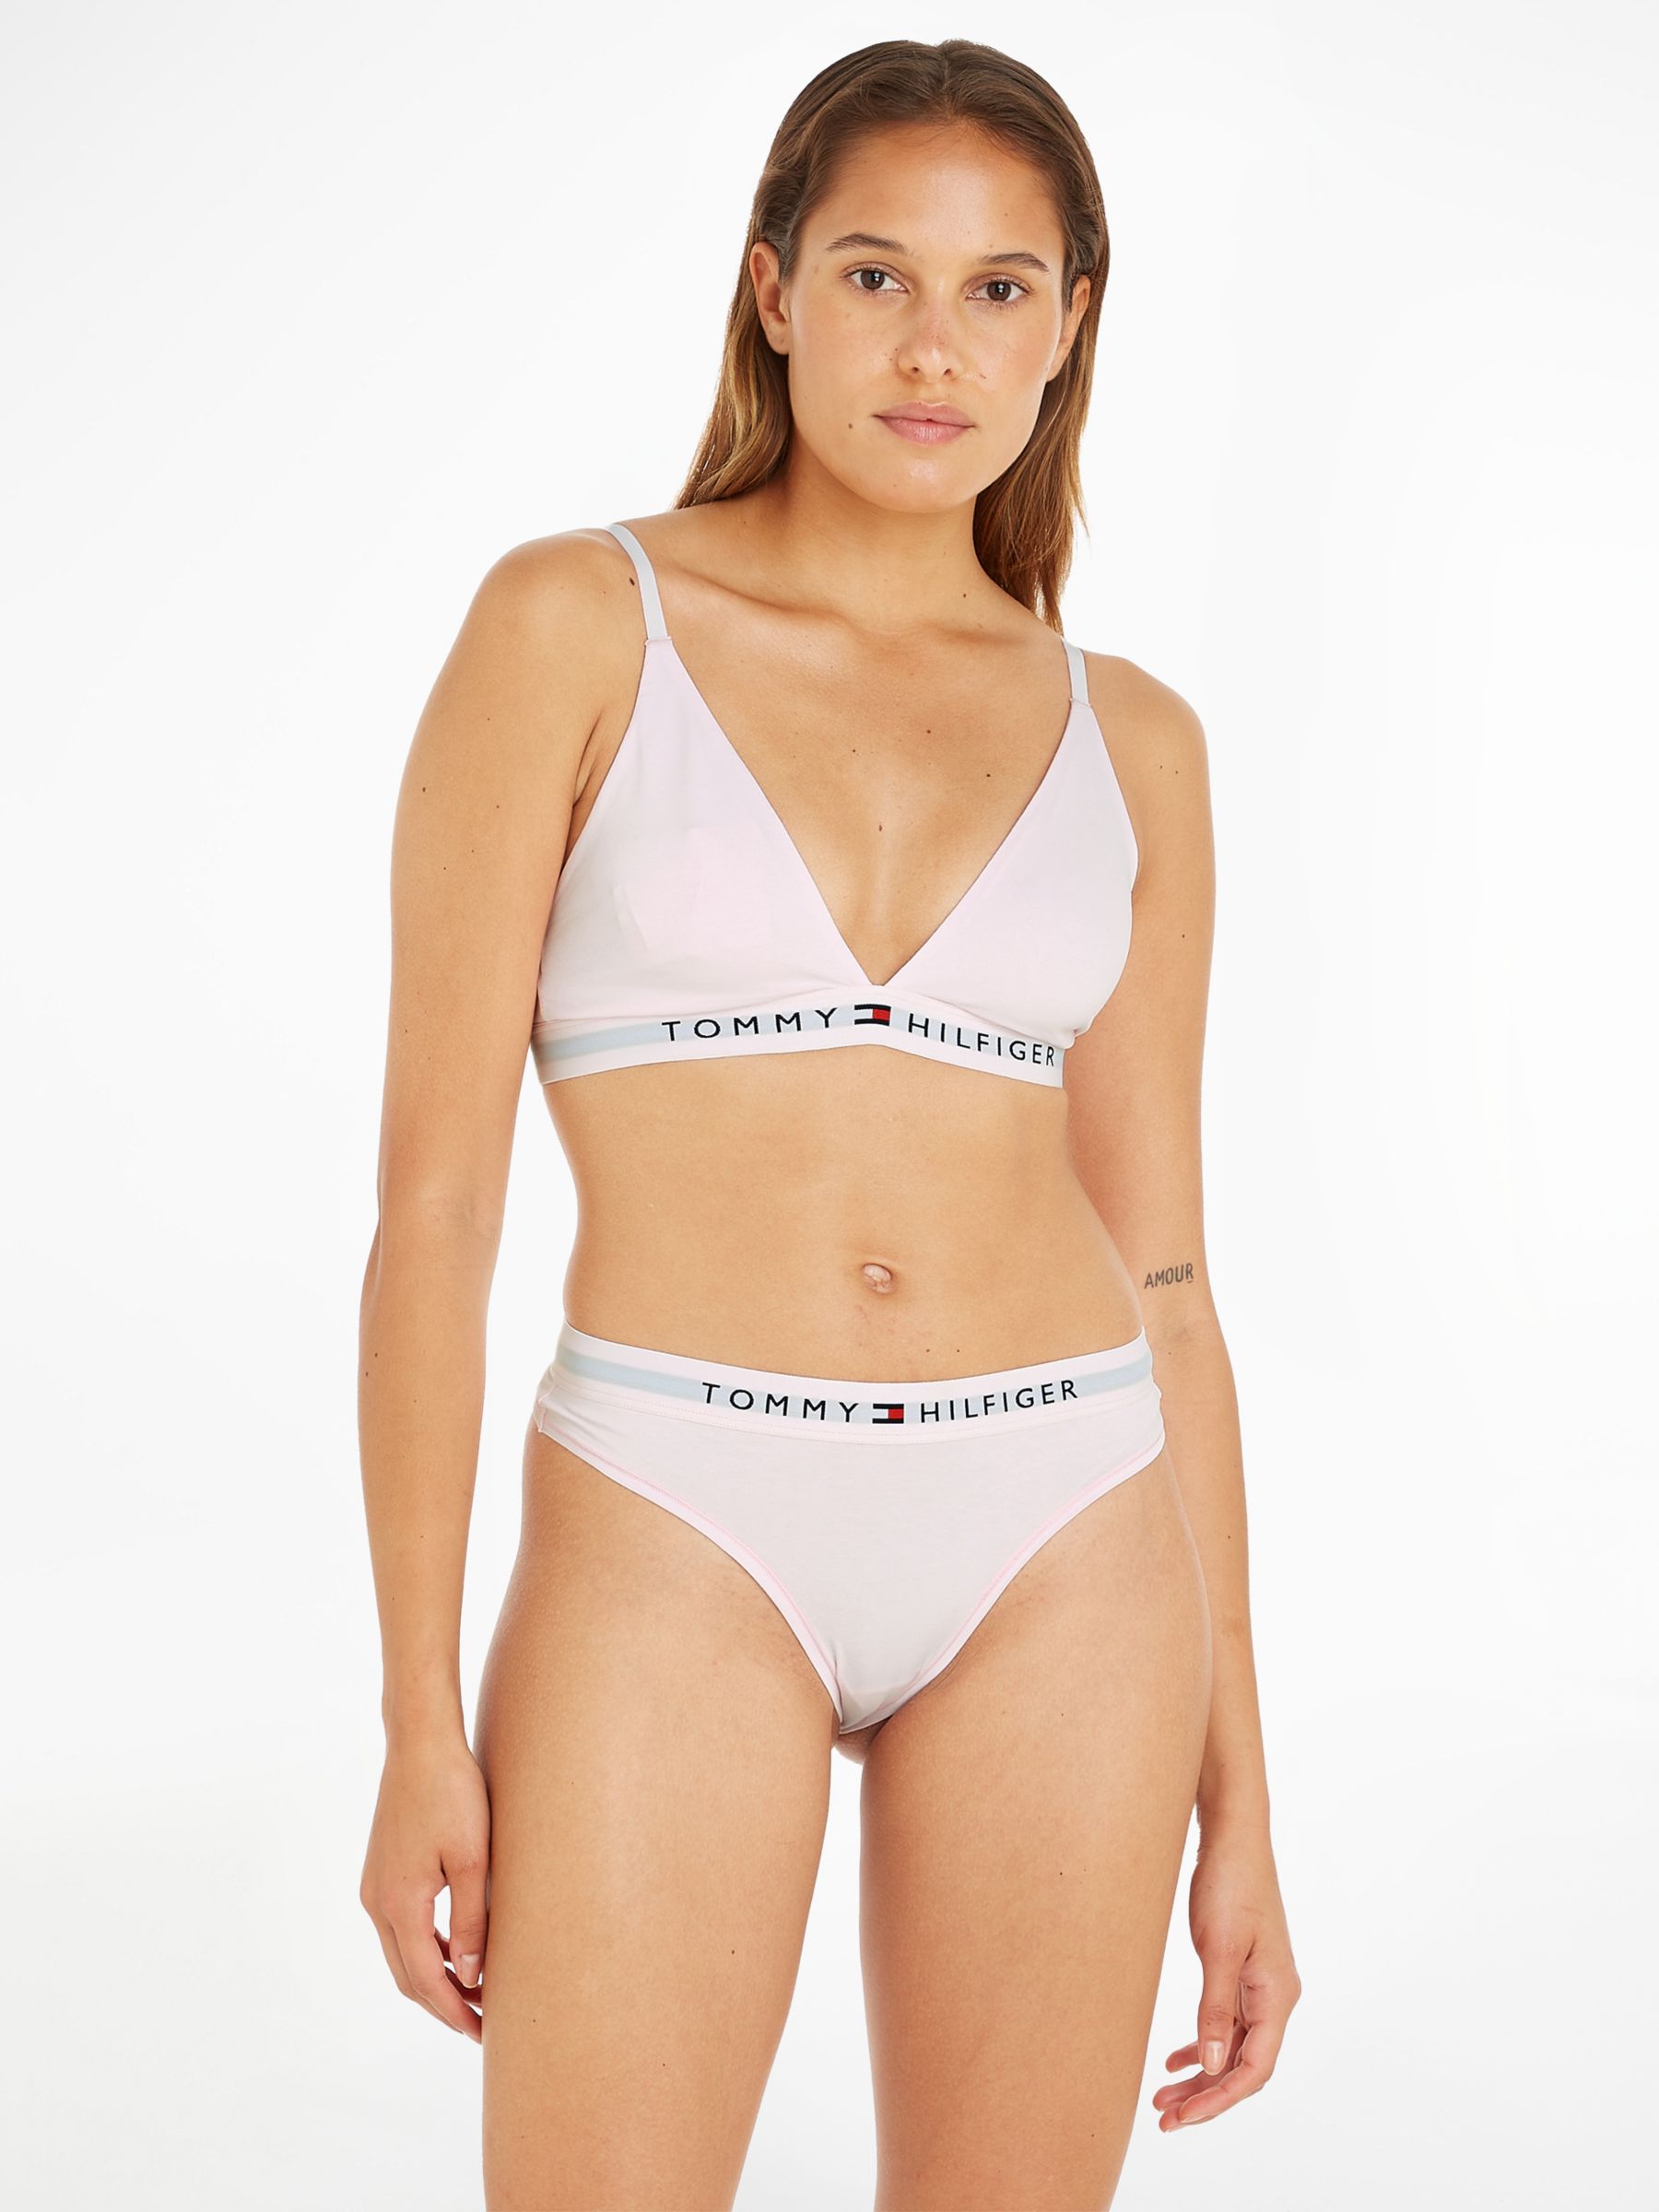 TOMMY HILFIGER UNDERWEAR COSTUME BRIEFS WITH LOGO WITH LACES Woman White